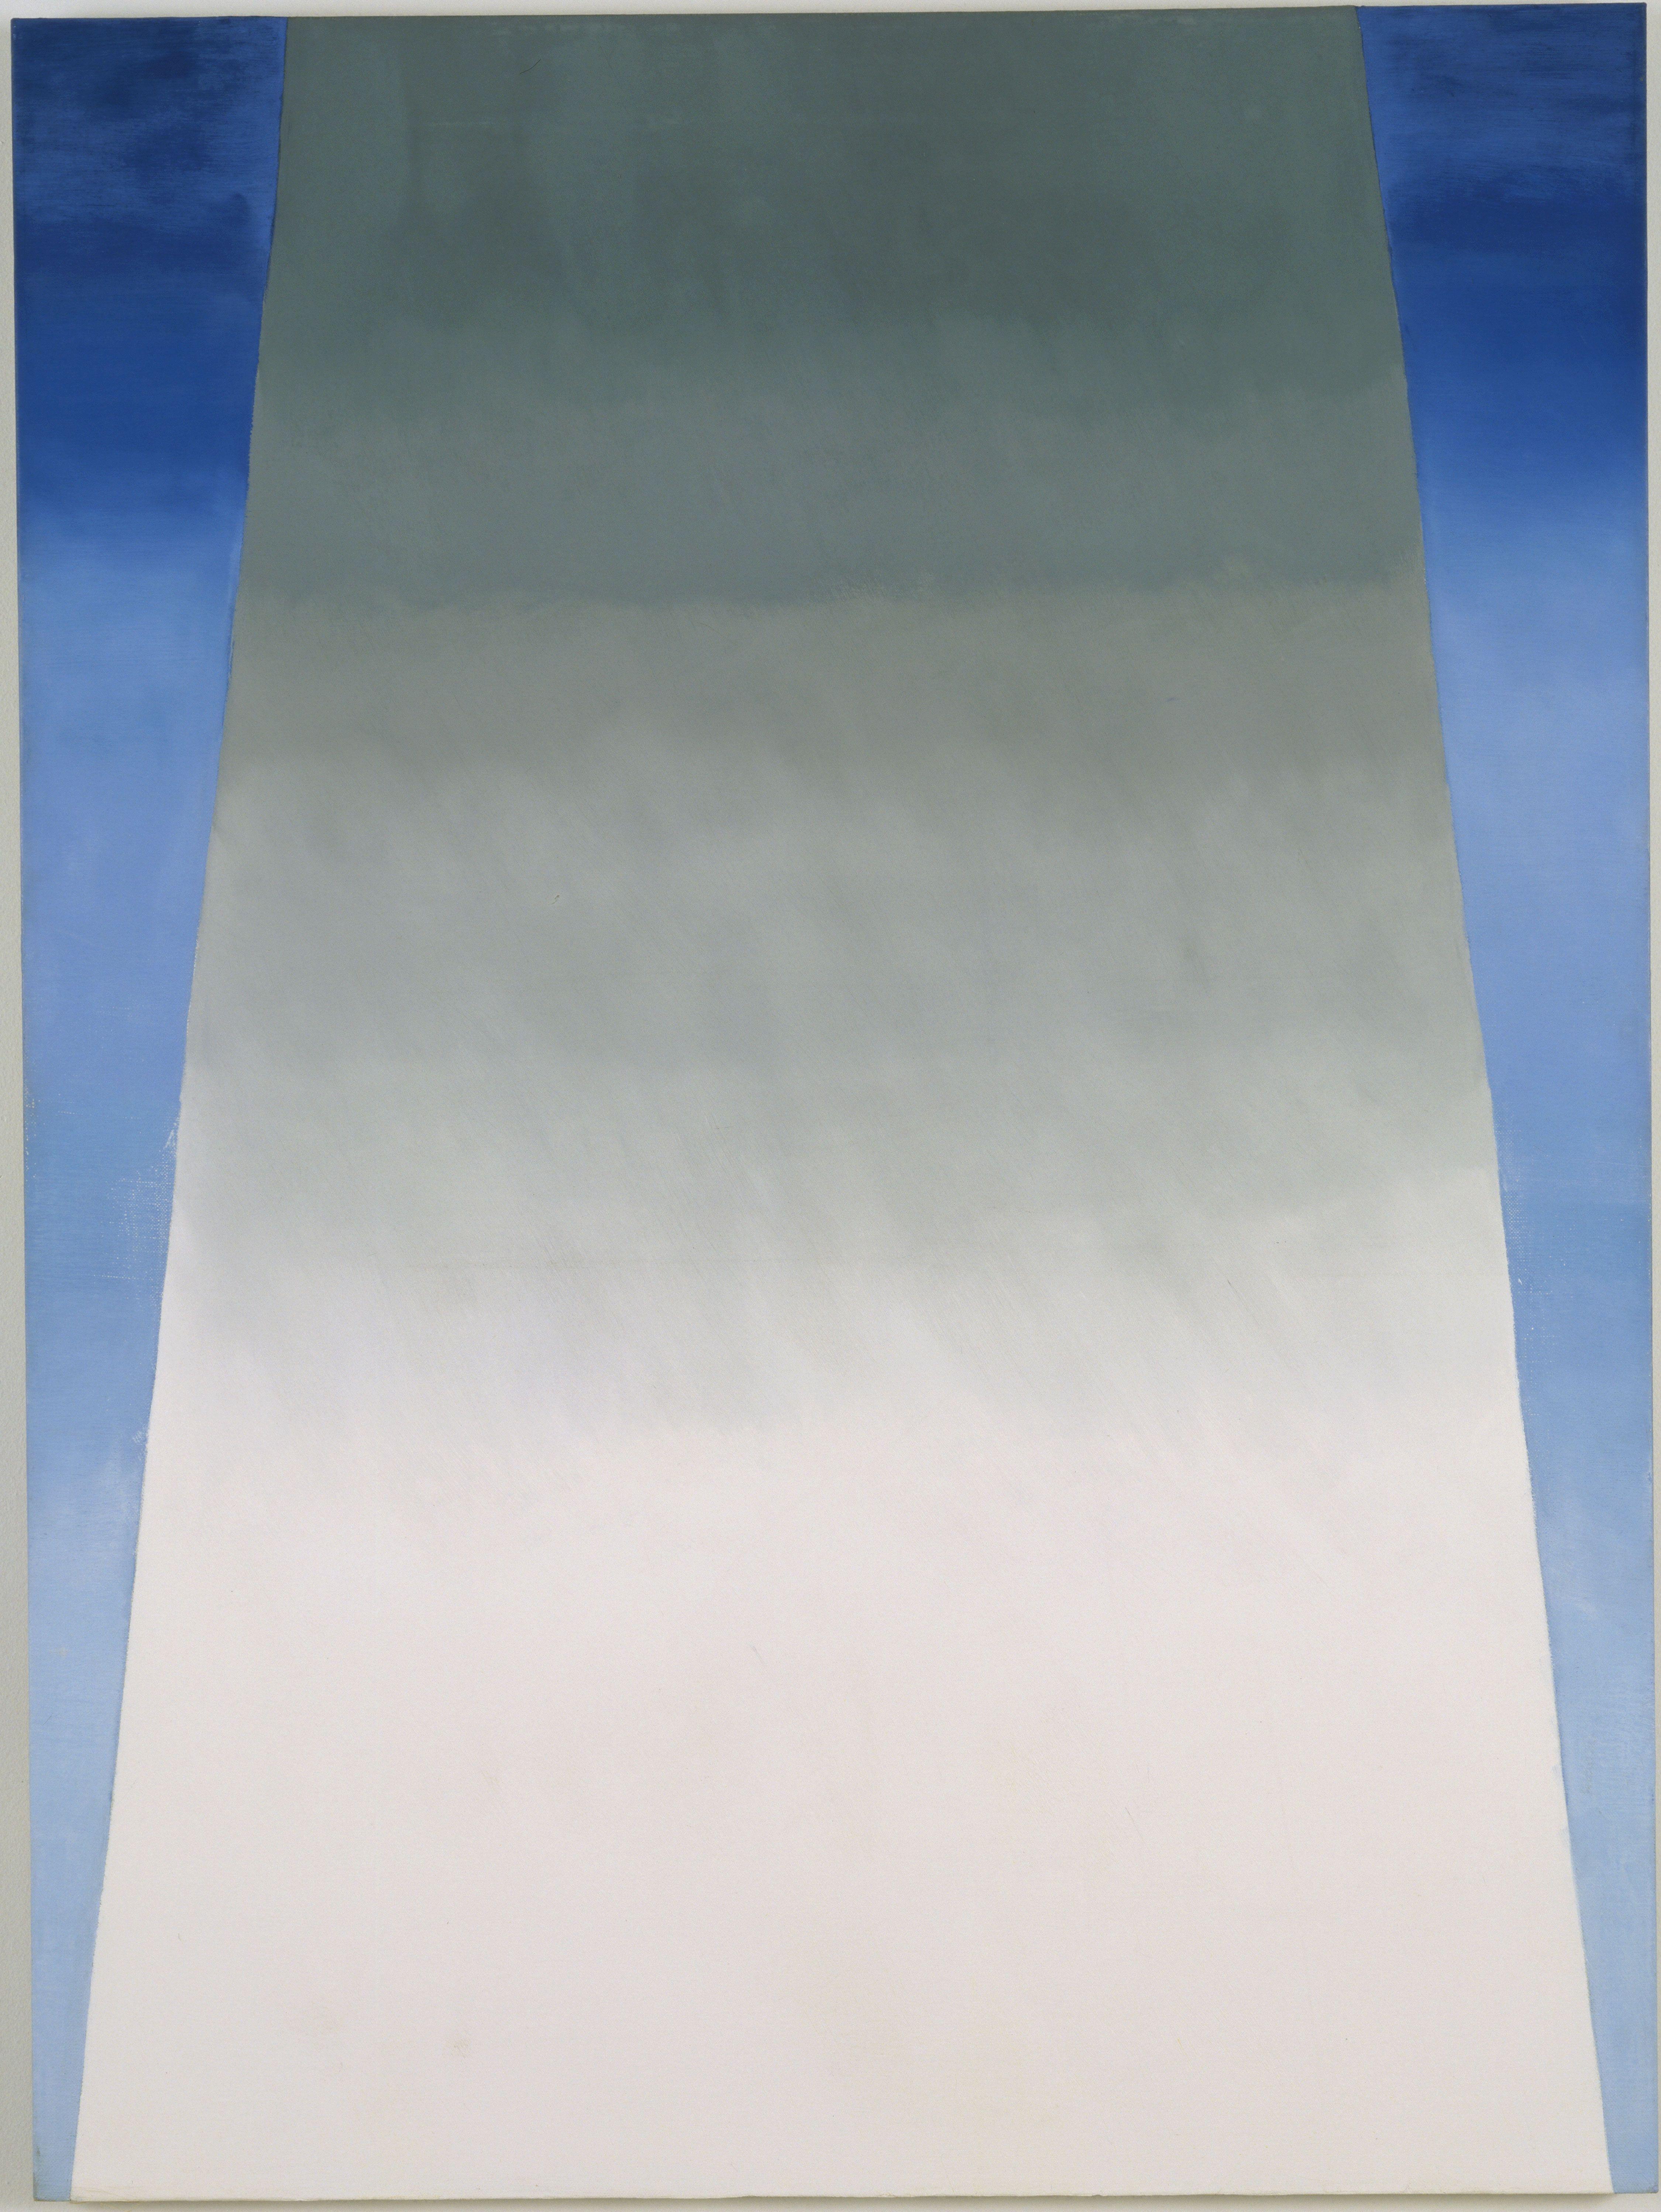 Georgia O'Keeffe. From a Day with Juan II. 1977. Source: MoMA